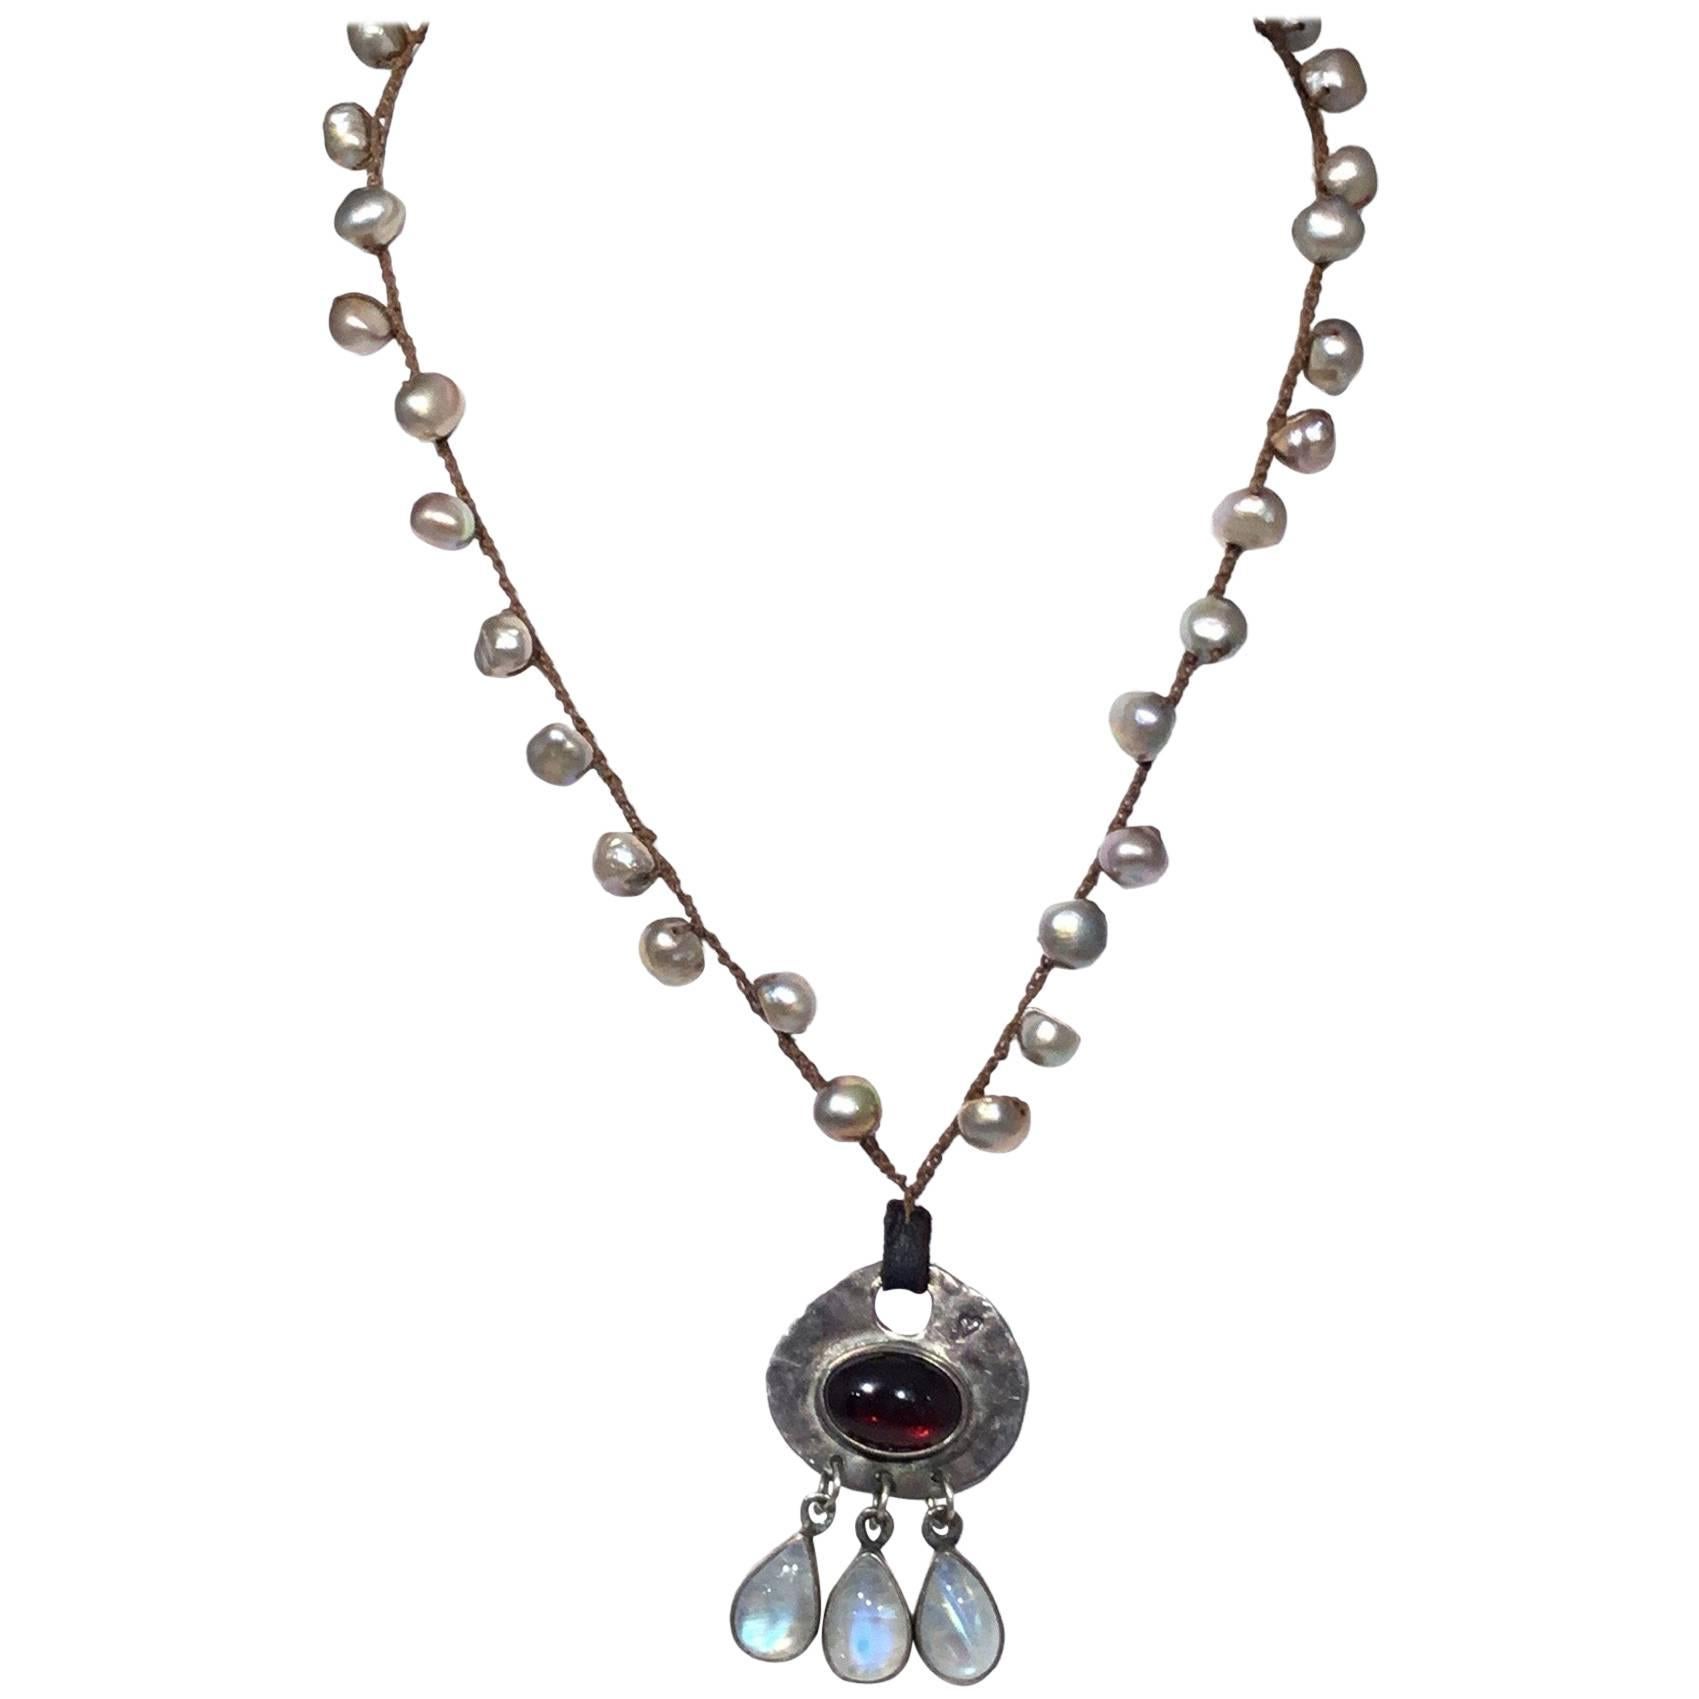 Jes Maharry Knotted Strand Pearl, Garnet, Moonstone Necklace